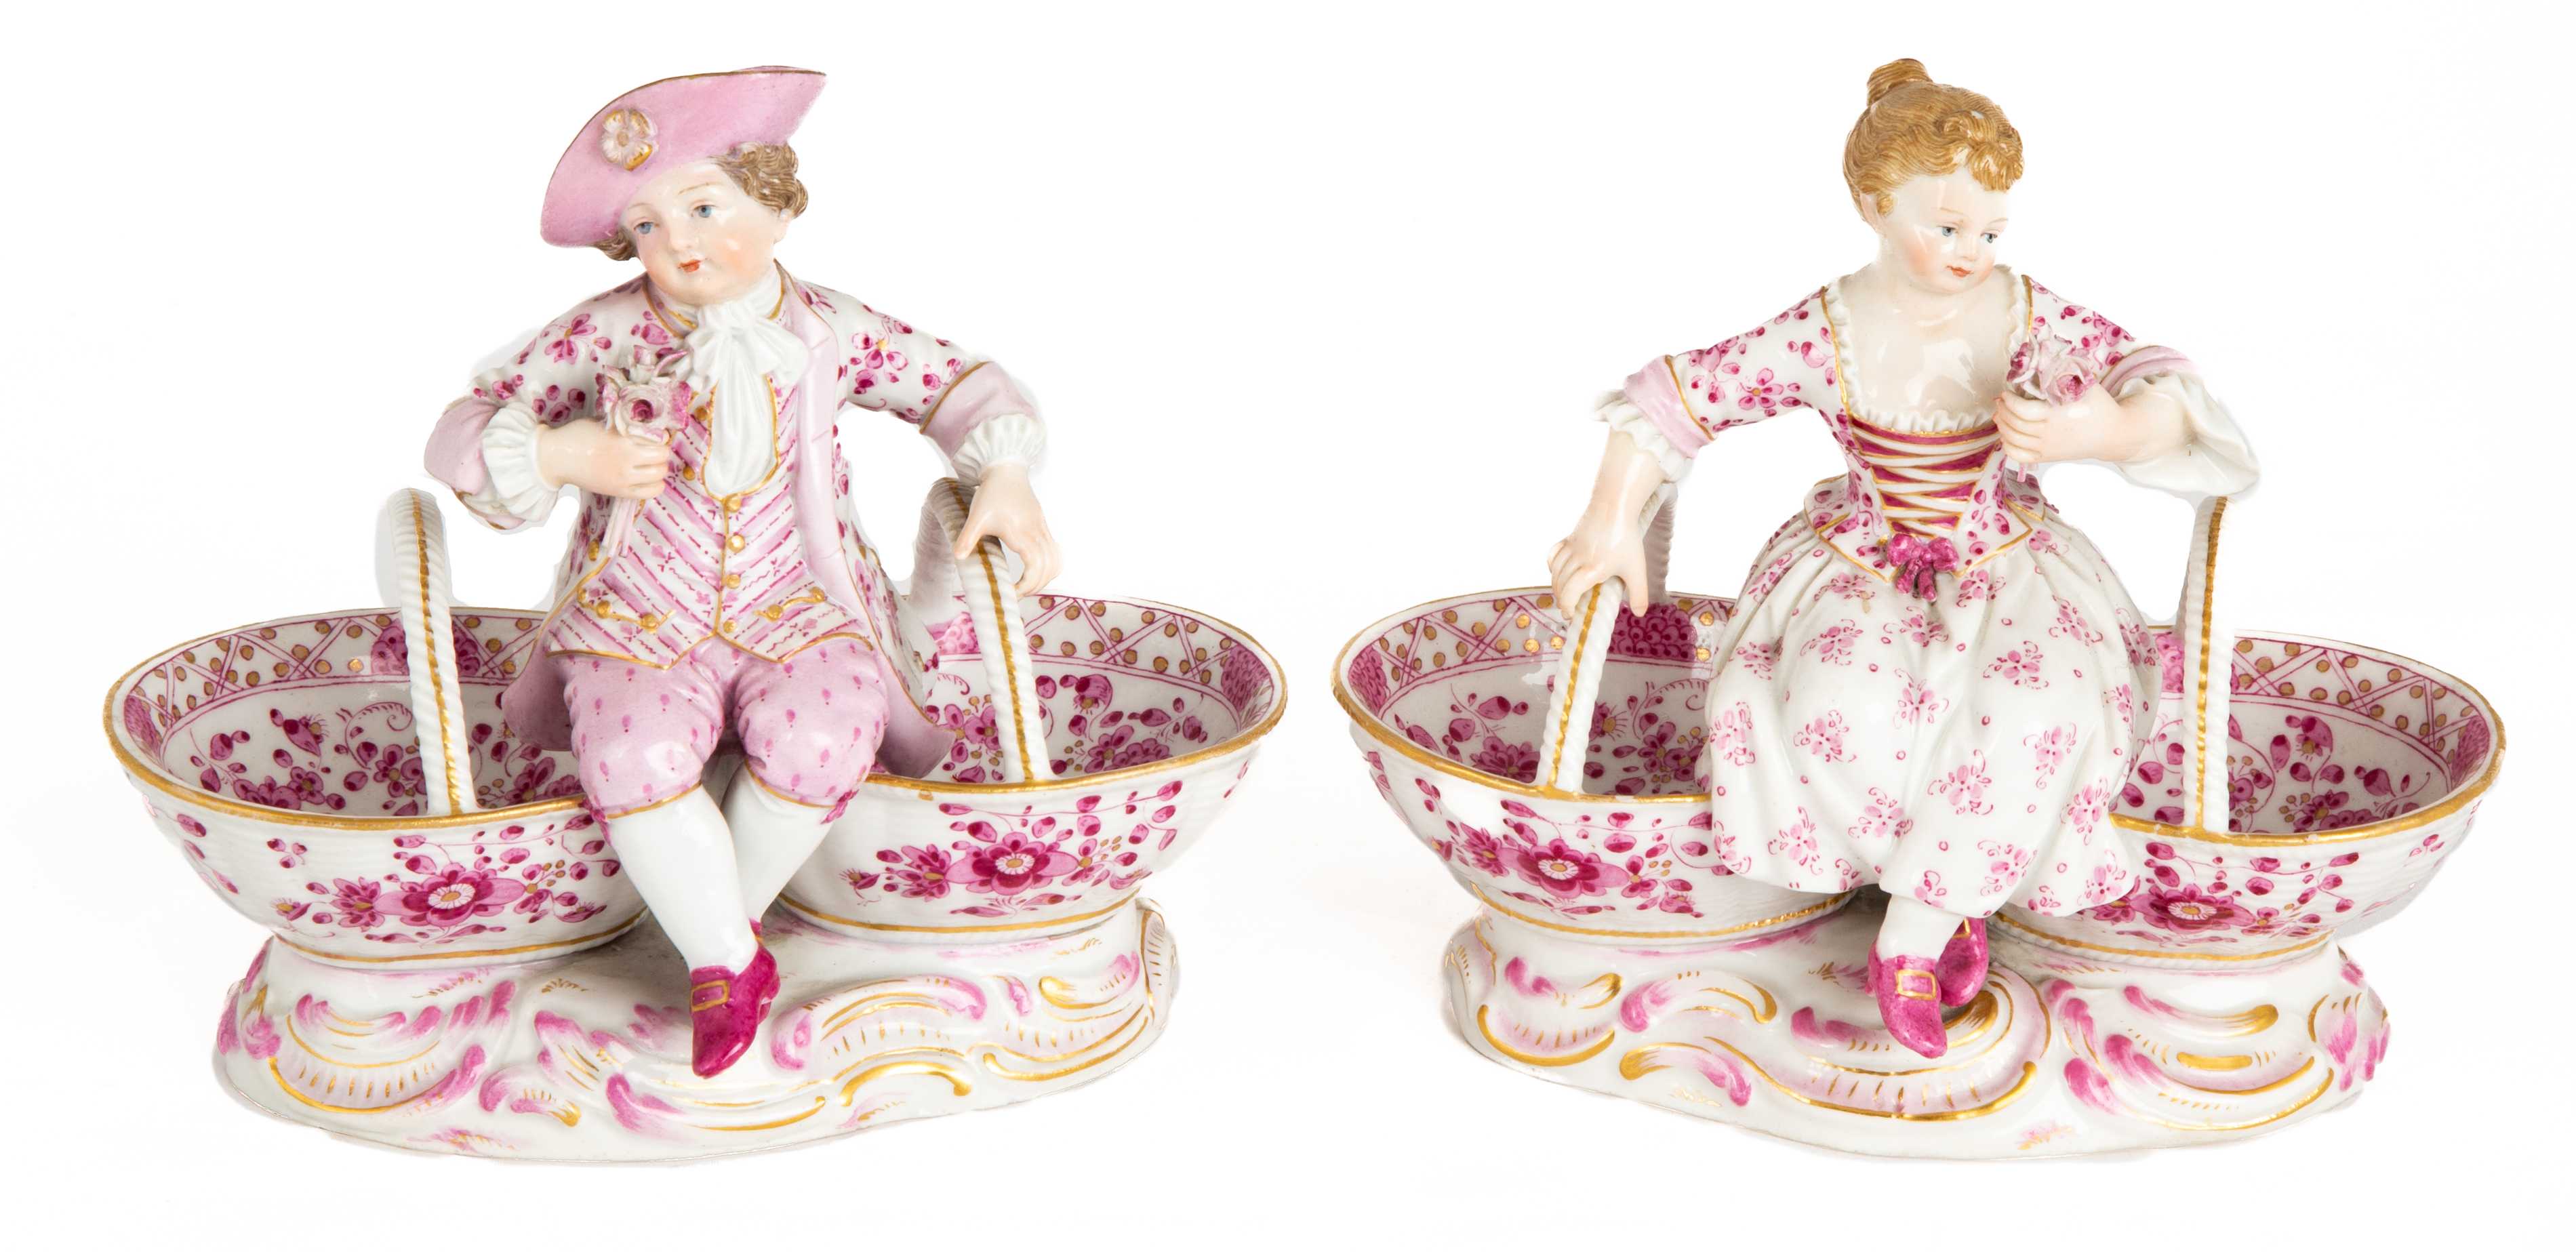 (3) MEISSEN SWEET MEAT DISHES 19th